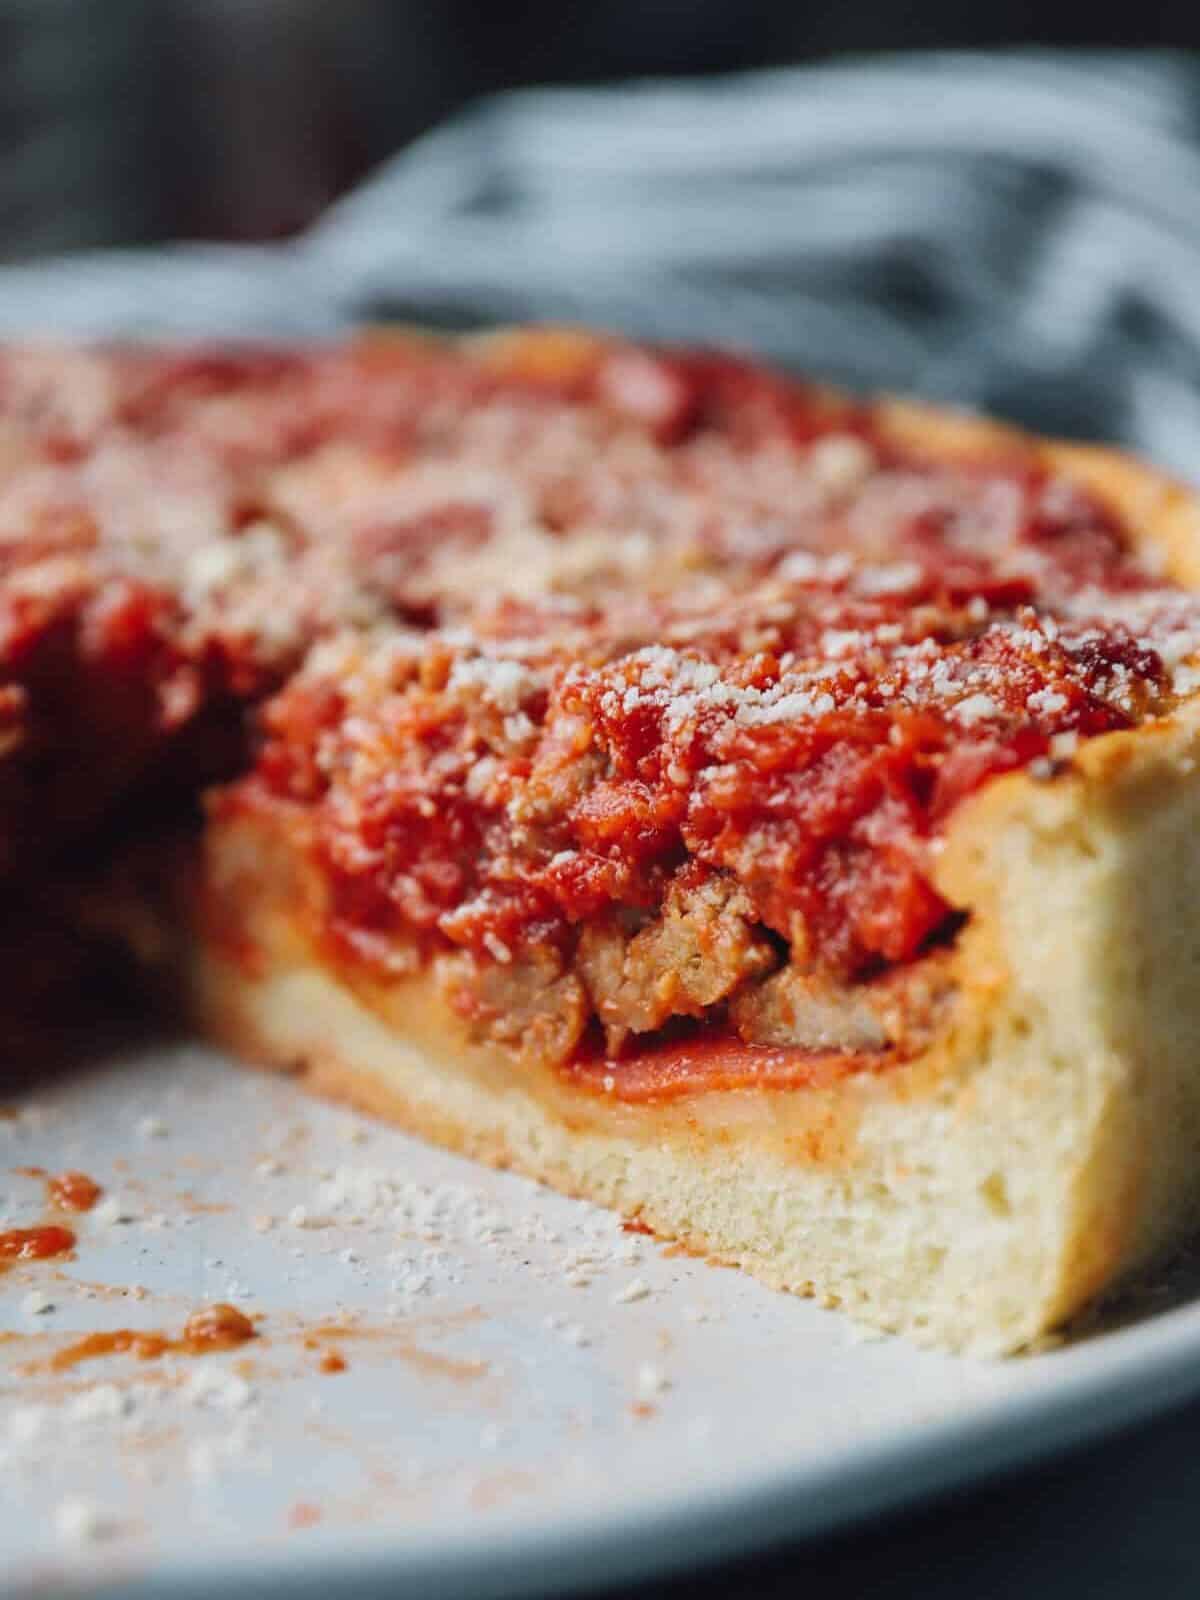 Grilled or Oven Baked Chicago Style Pizza